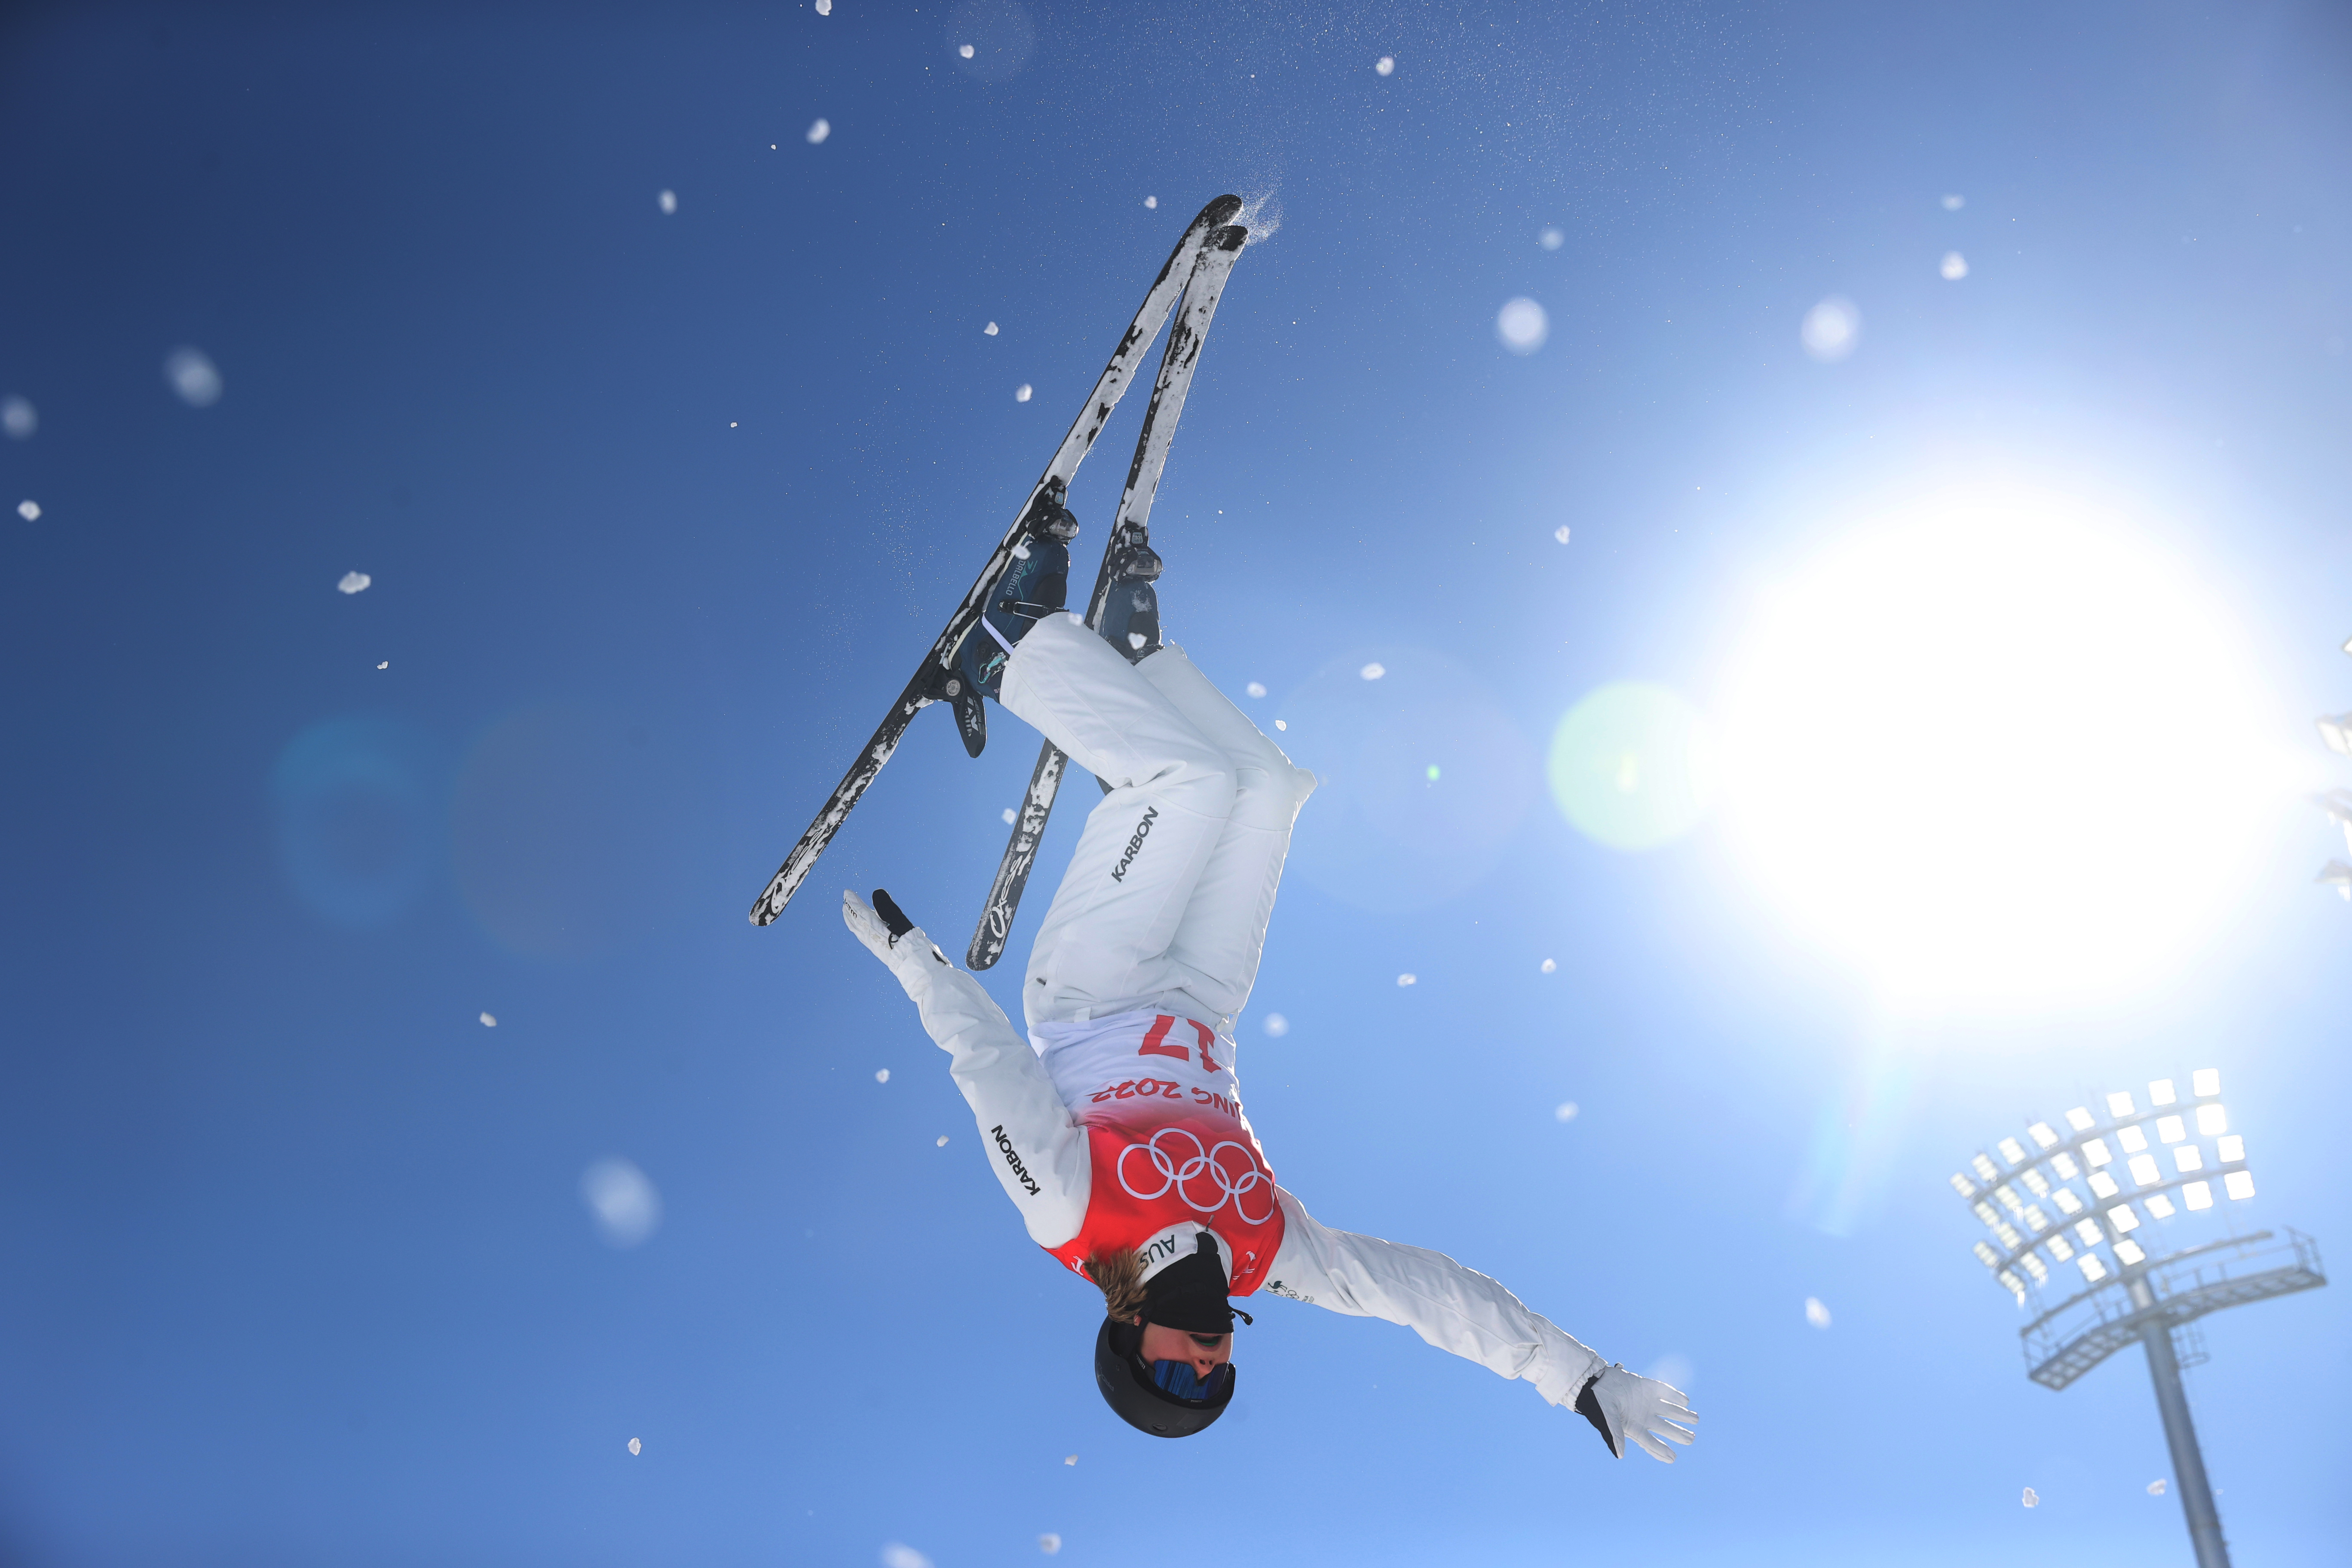 Image shows a freestyle skier 